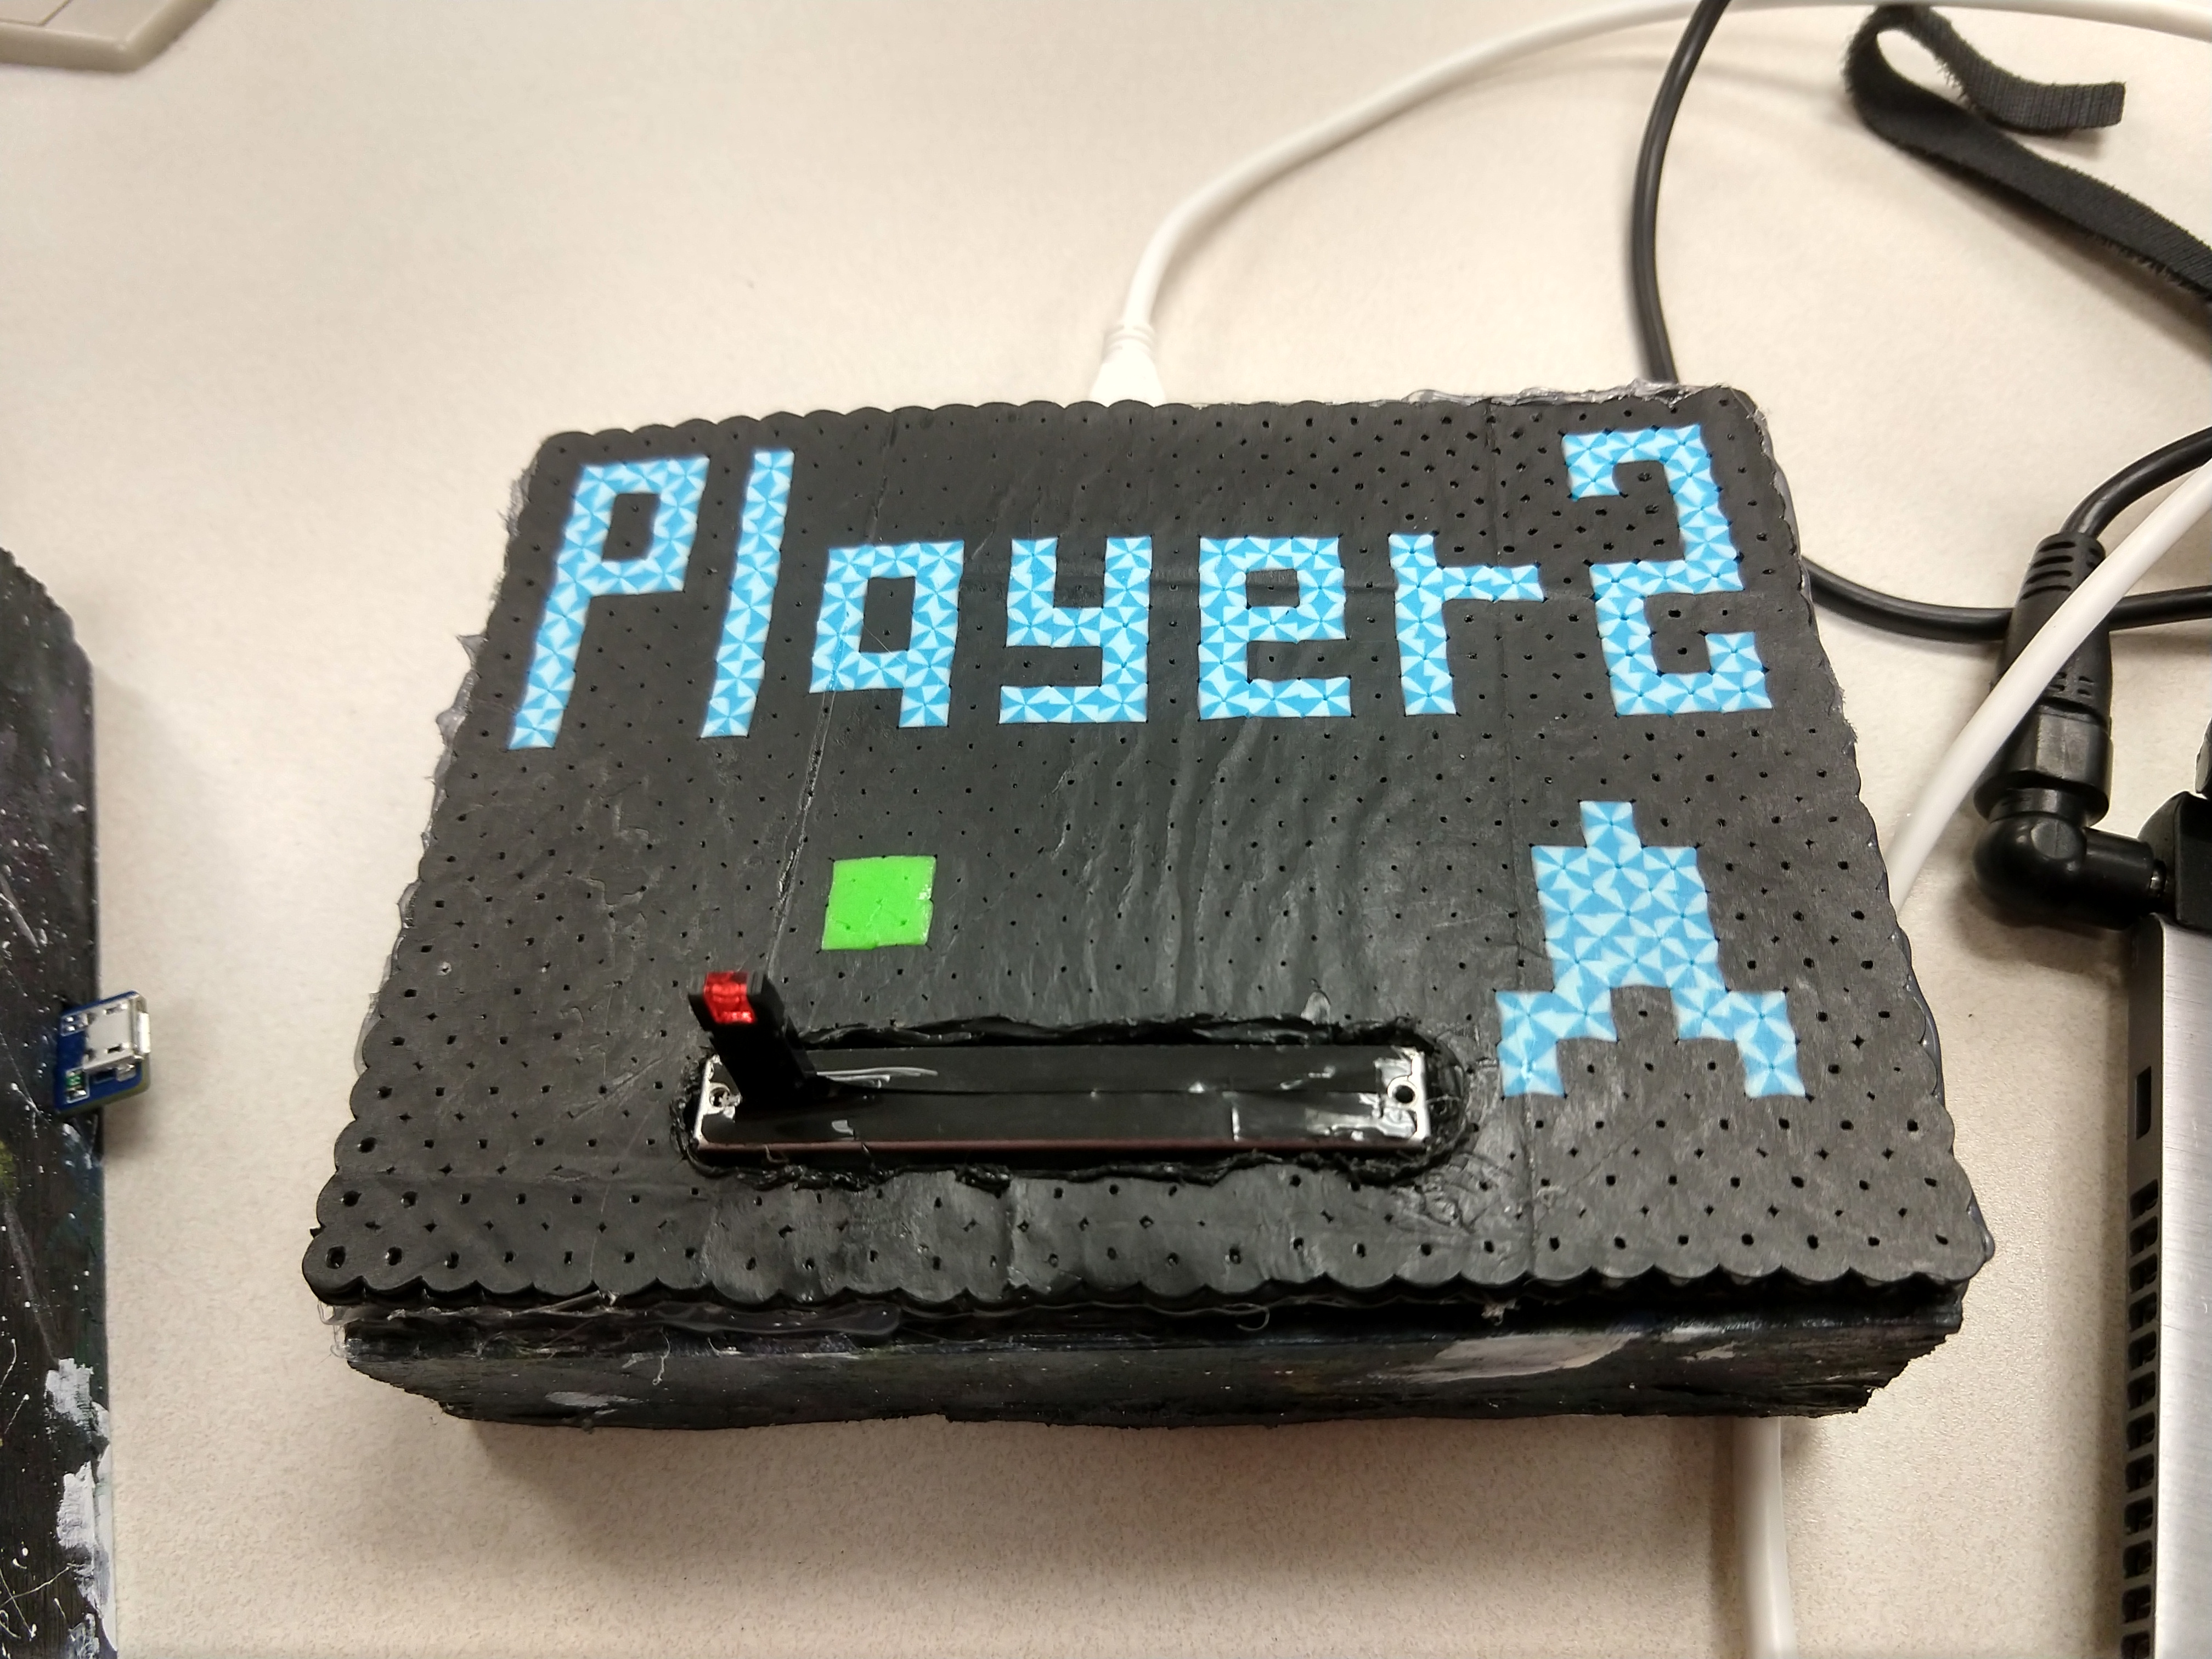 Pong controller made by ECE 412 students